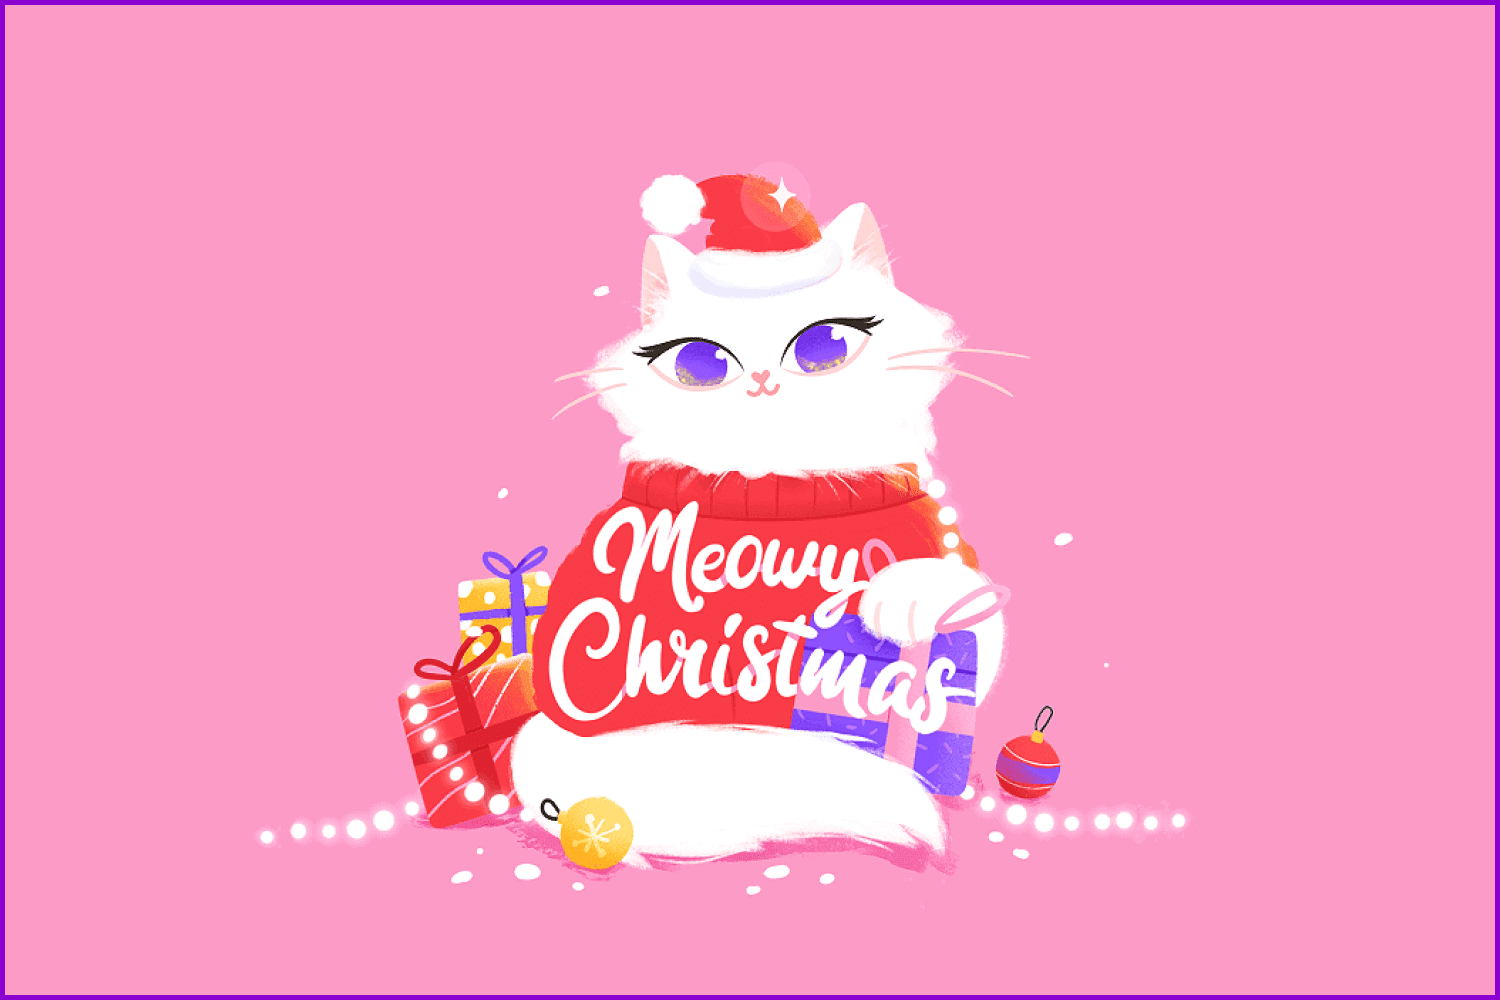 Animated white kitty with presents.